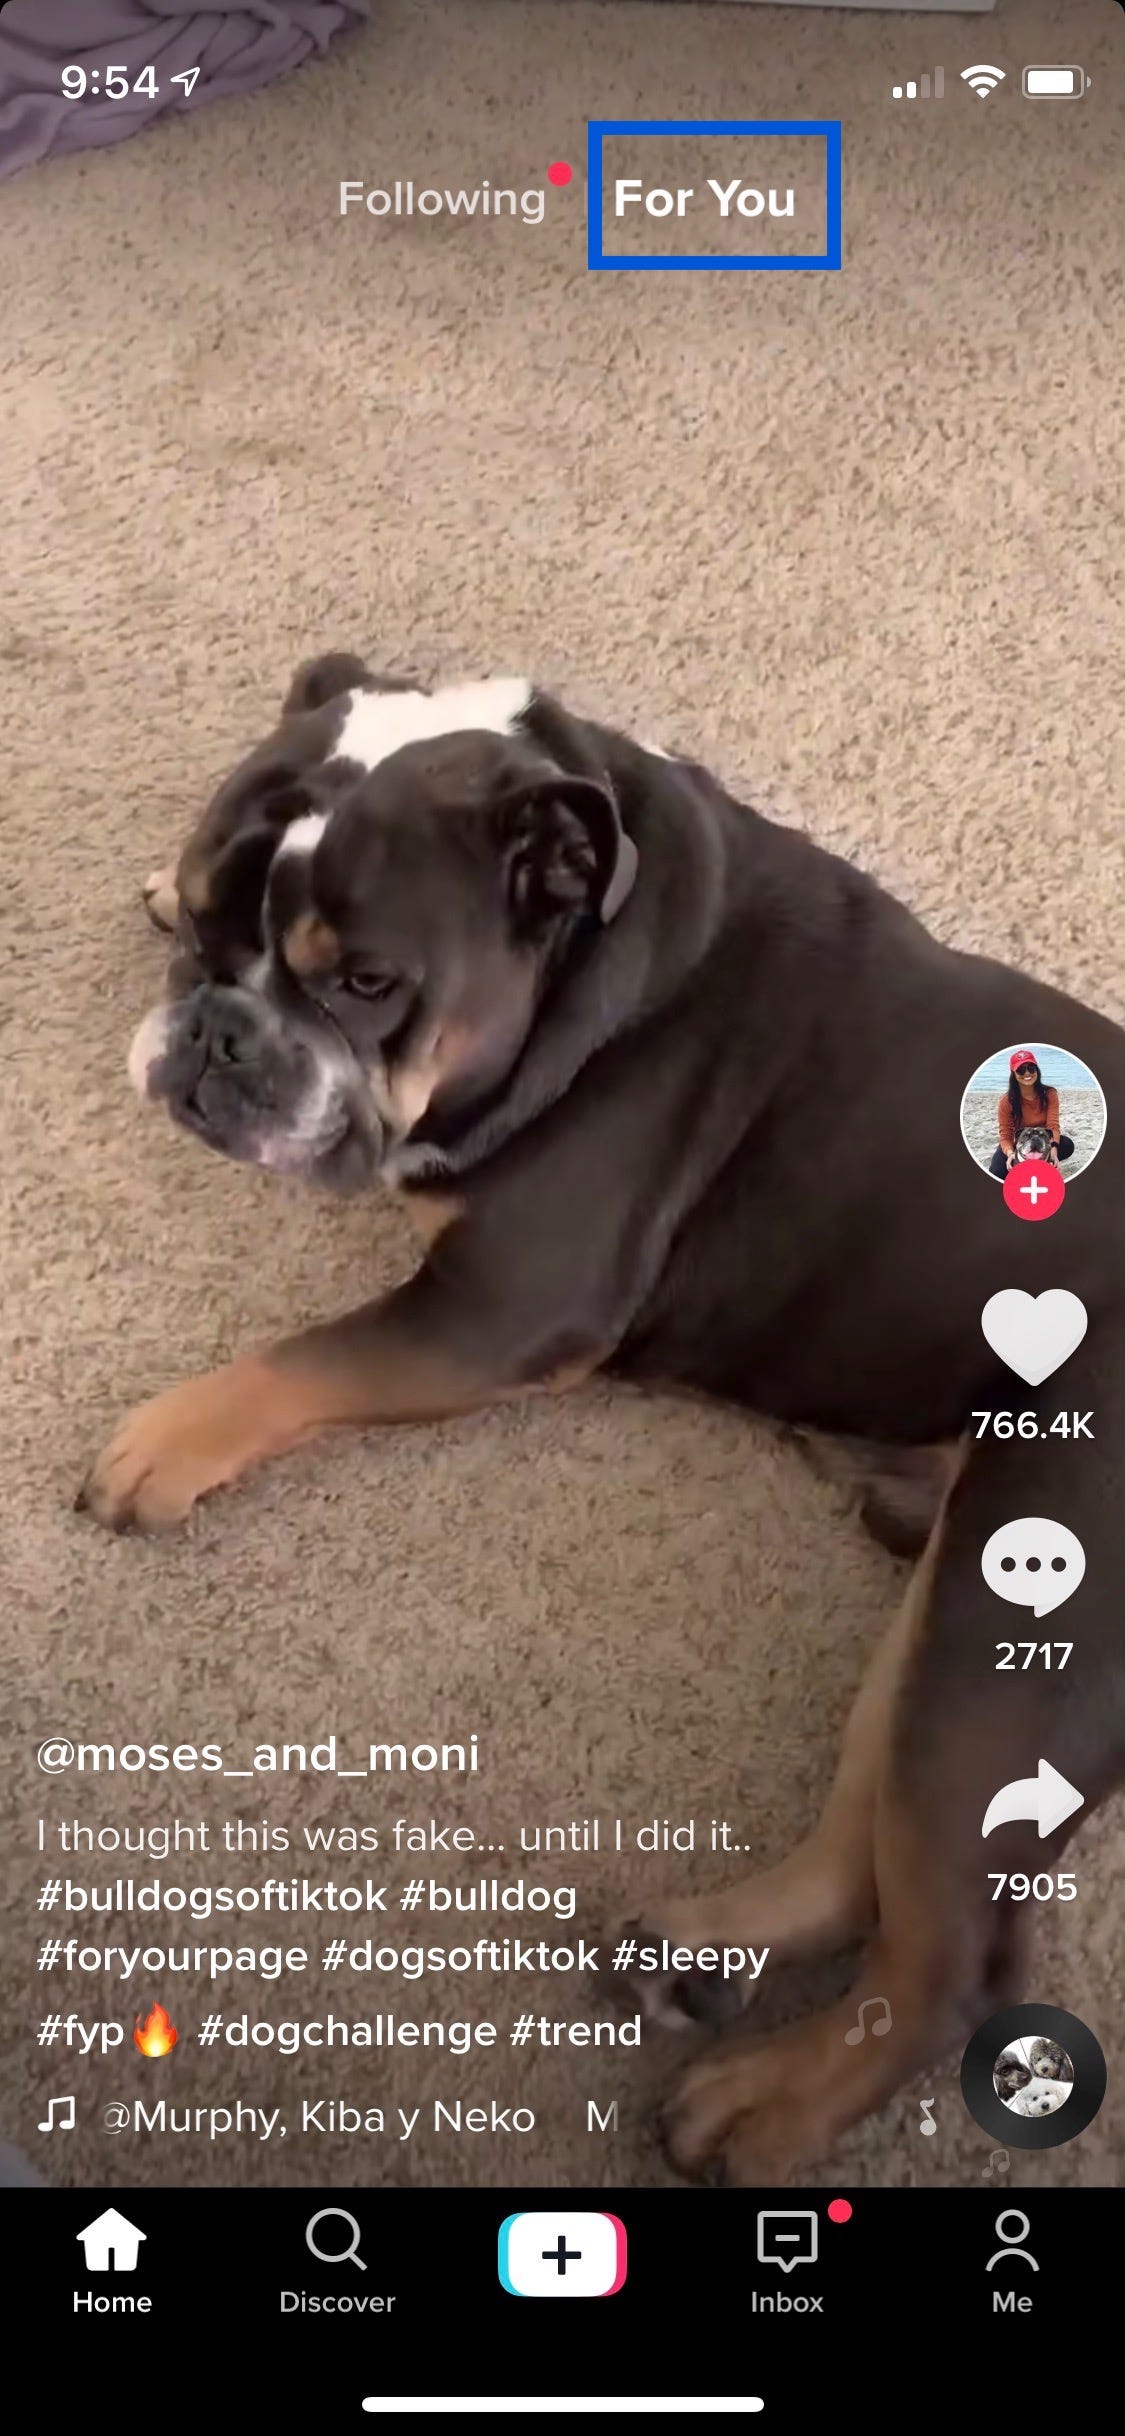 A screenshot of TikTok’s “For Your Page” feed illustrates the interface’s key elements and contains a video of a dog.